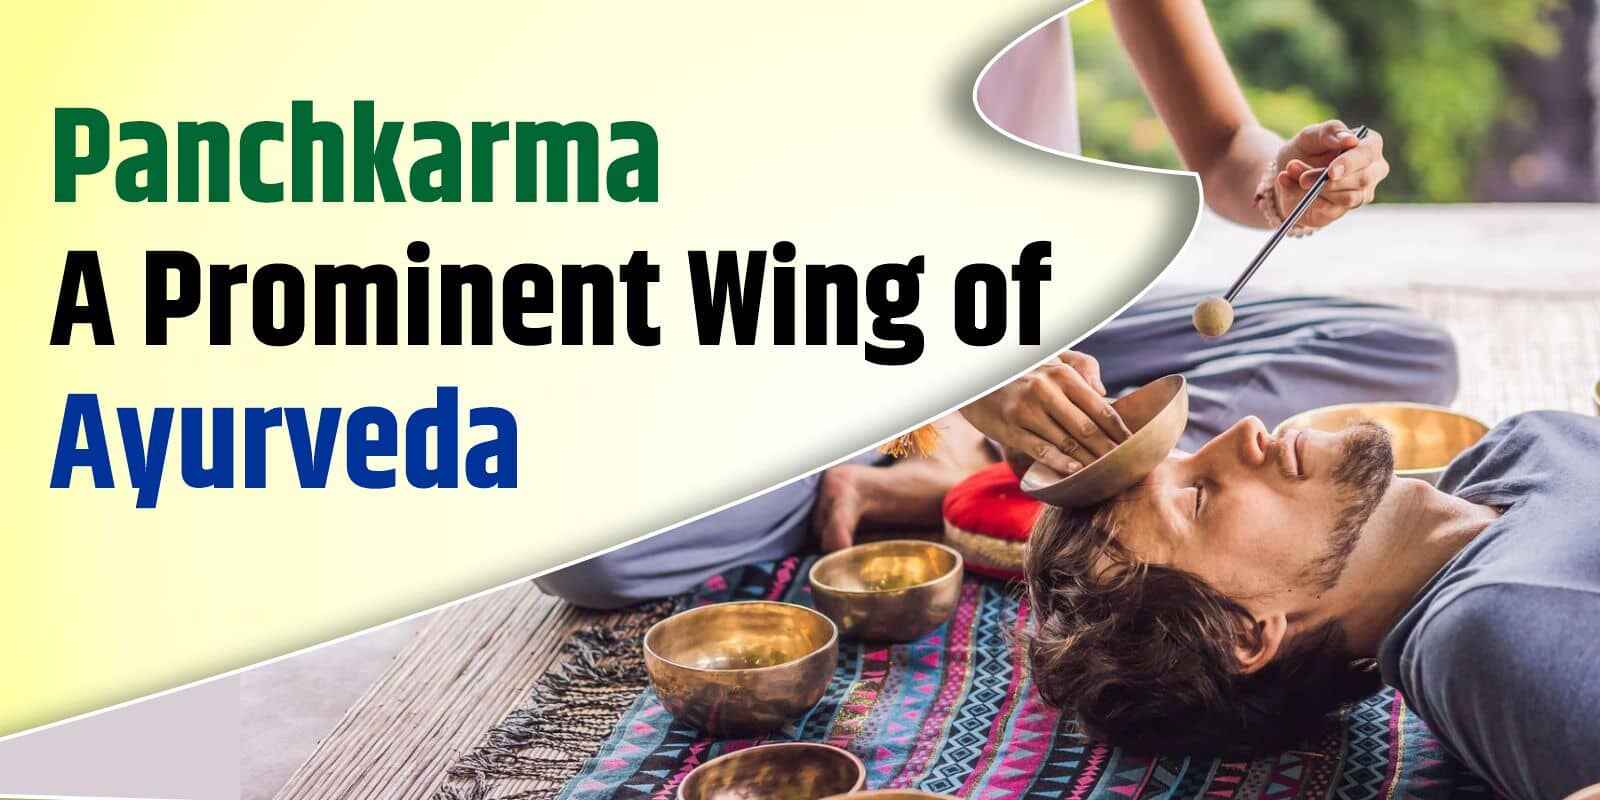 Panchkarma: A Prominent Wing of Ayurveda